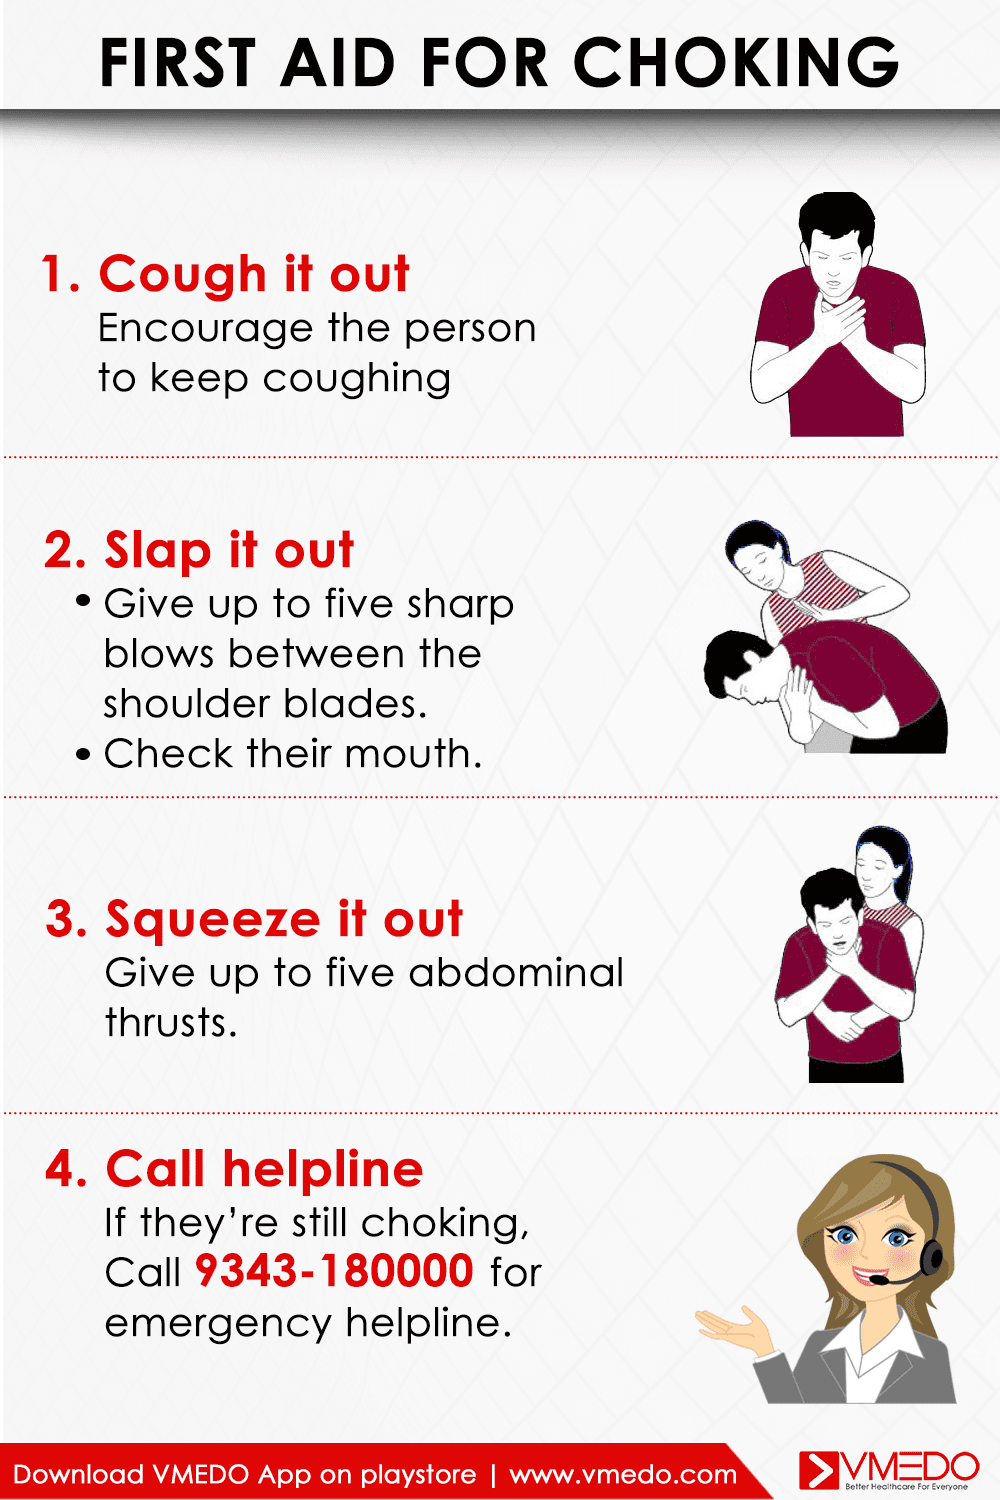 how-to-perform-first-aid-on-choking-victim